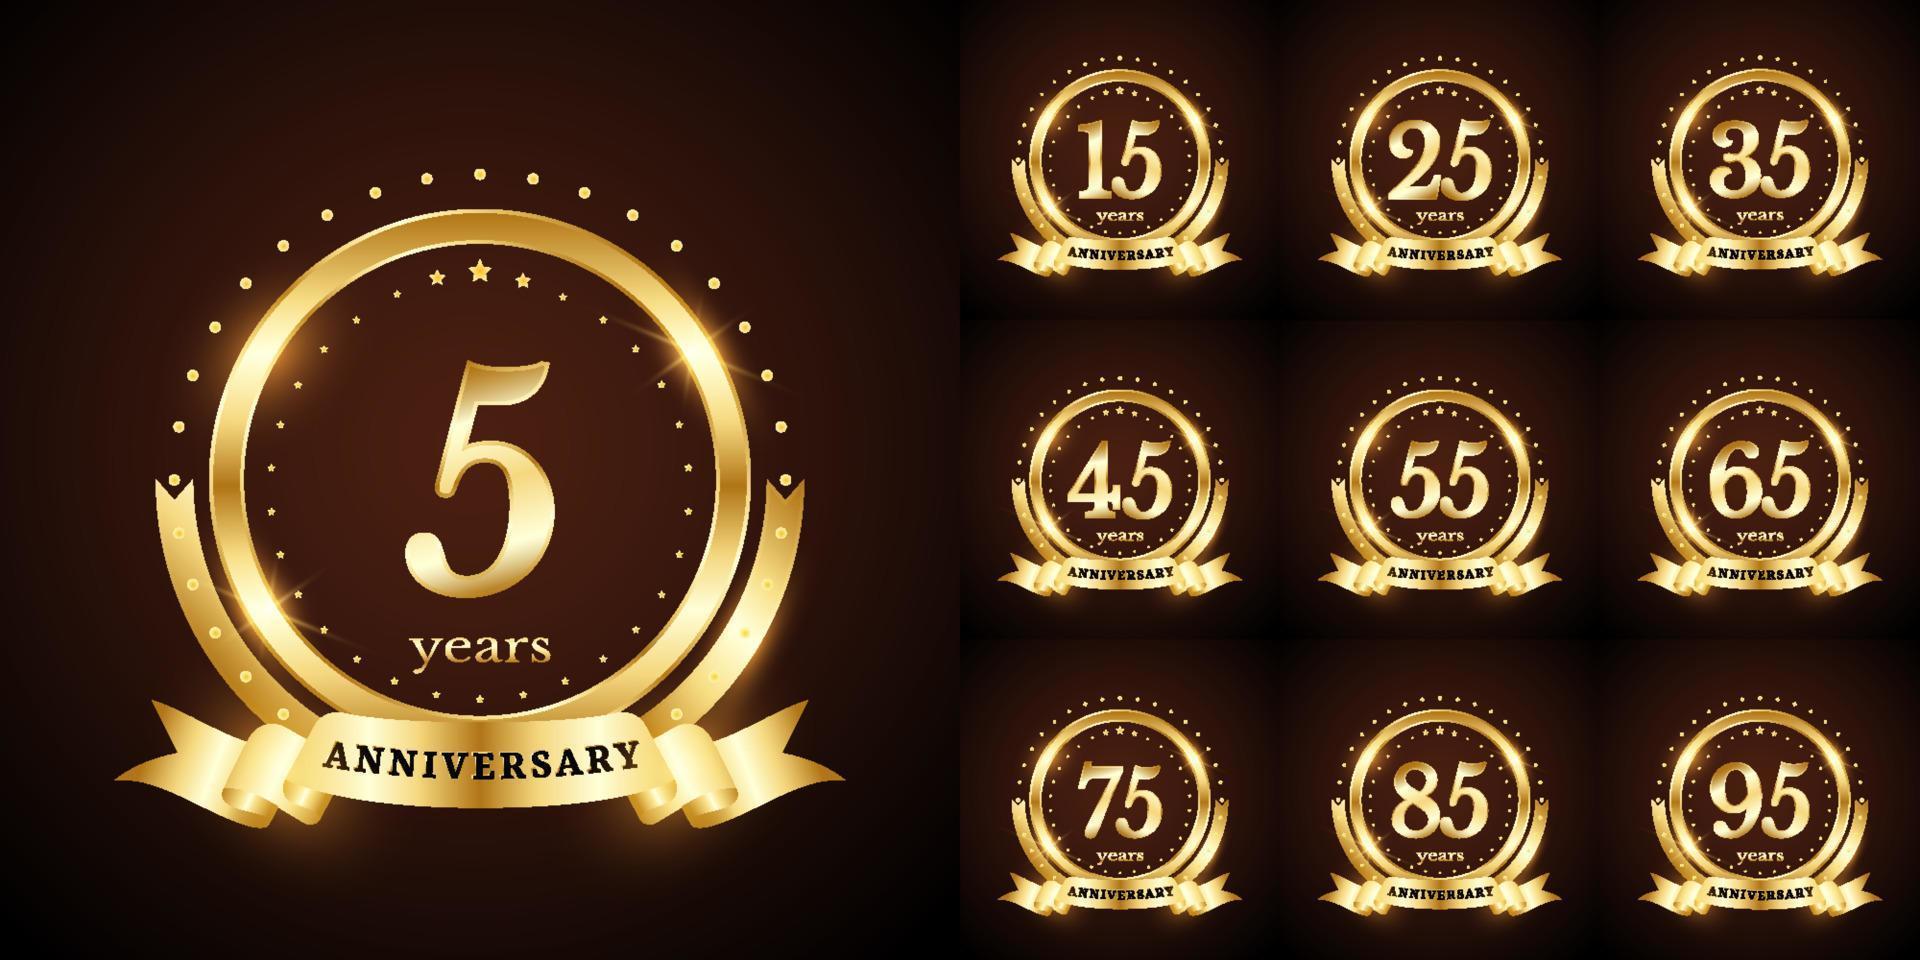 Anniversary number logotype label badge template. Premium anniversary celebration emblem signs design png for company, booklet, leaflet, magazine, brochure, web, invitation or greeting card vector